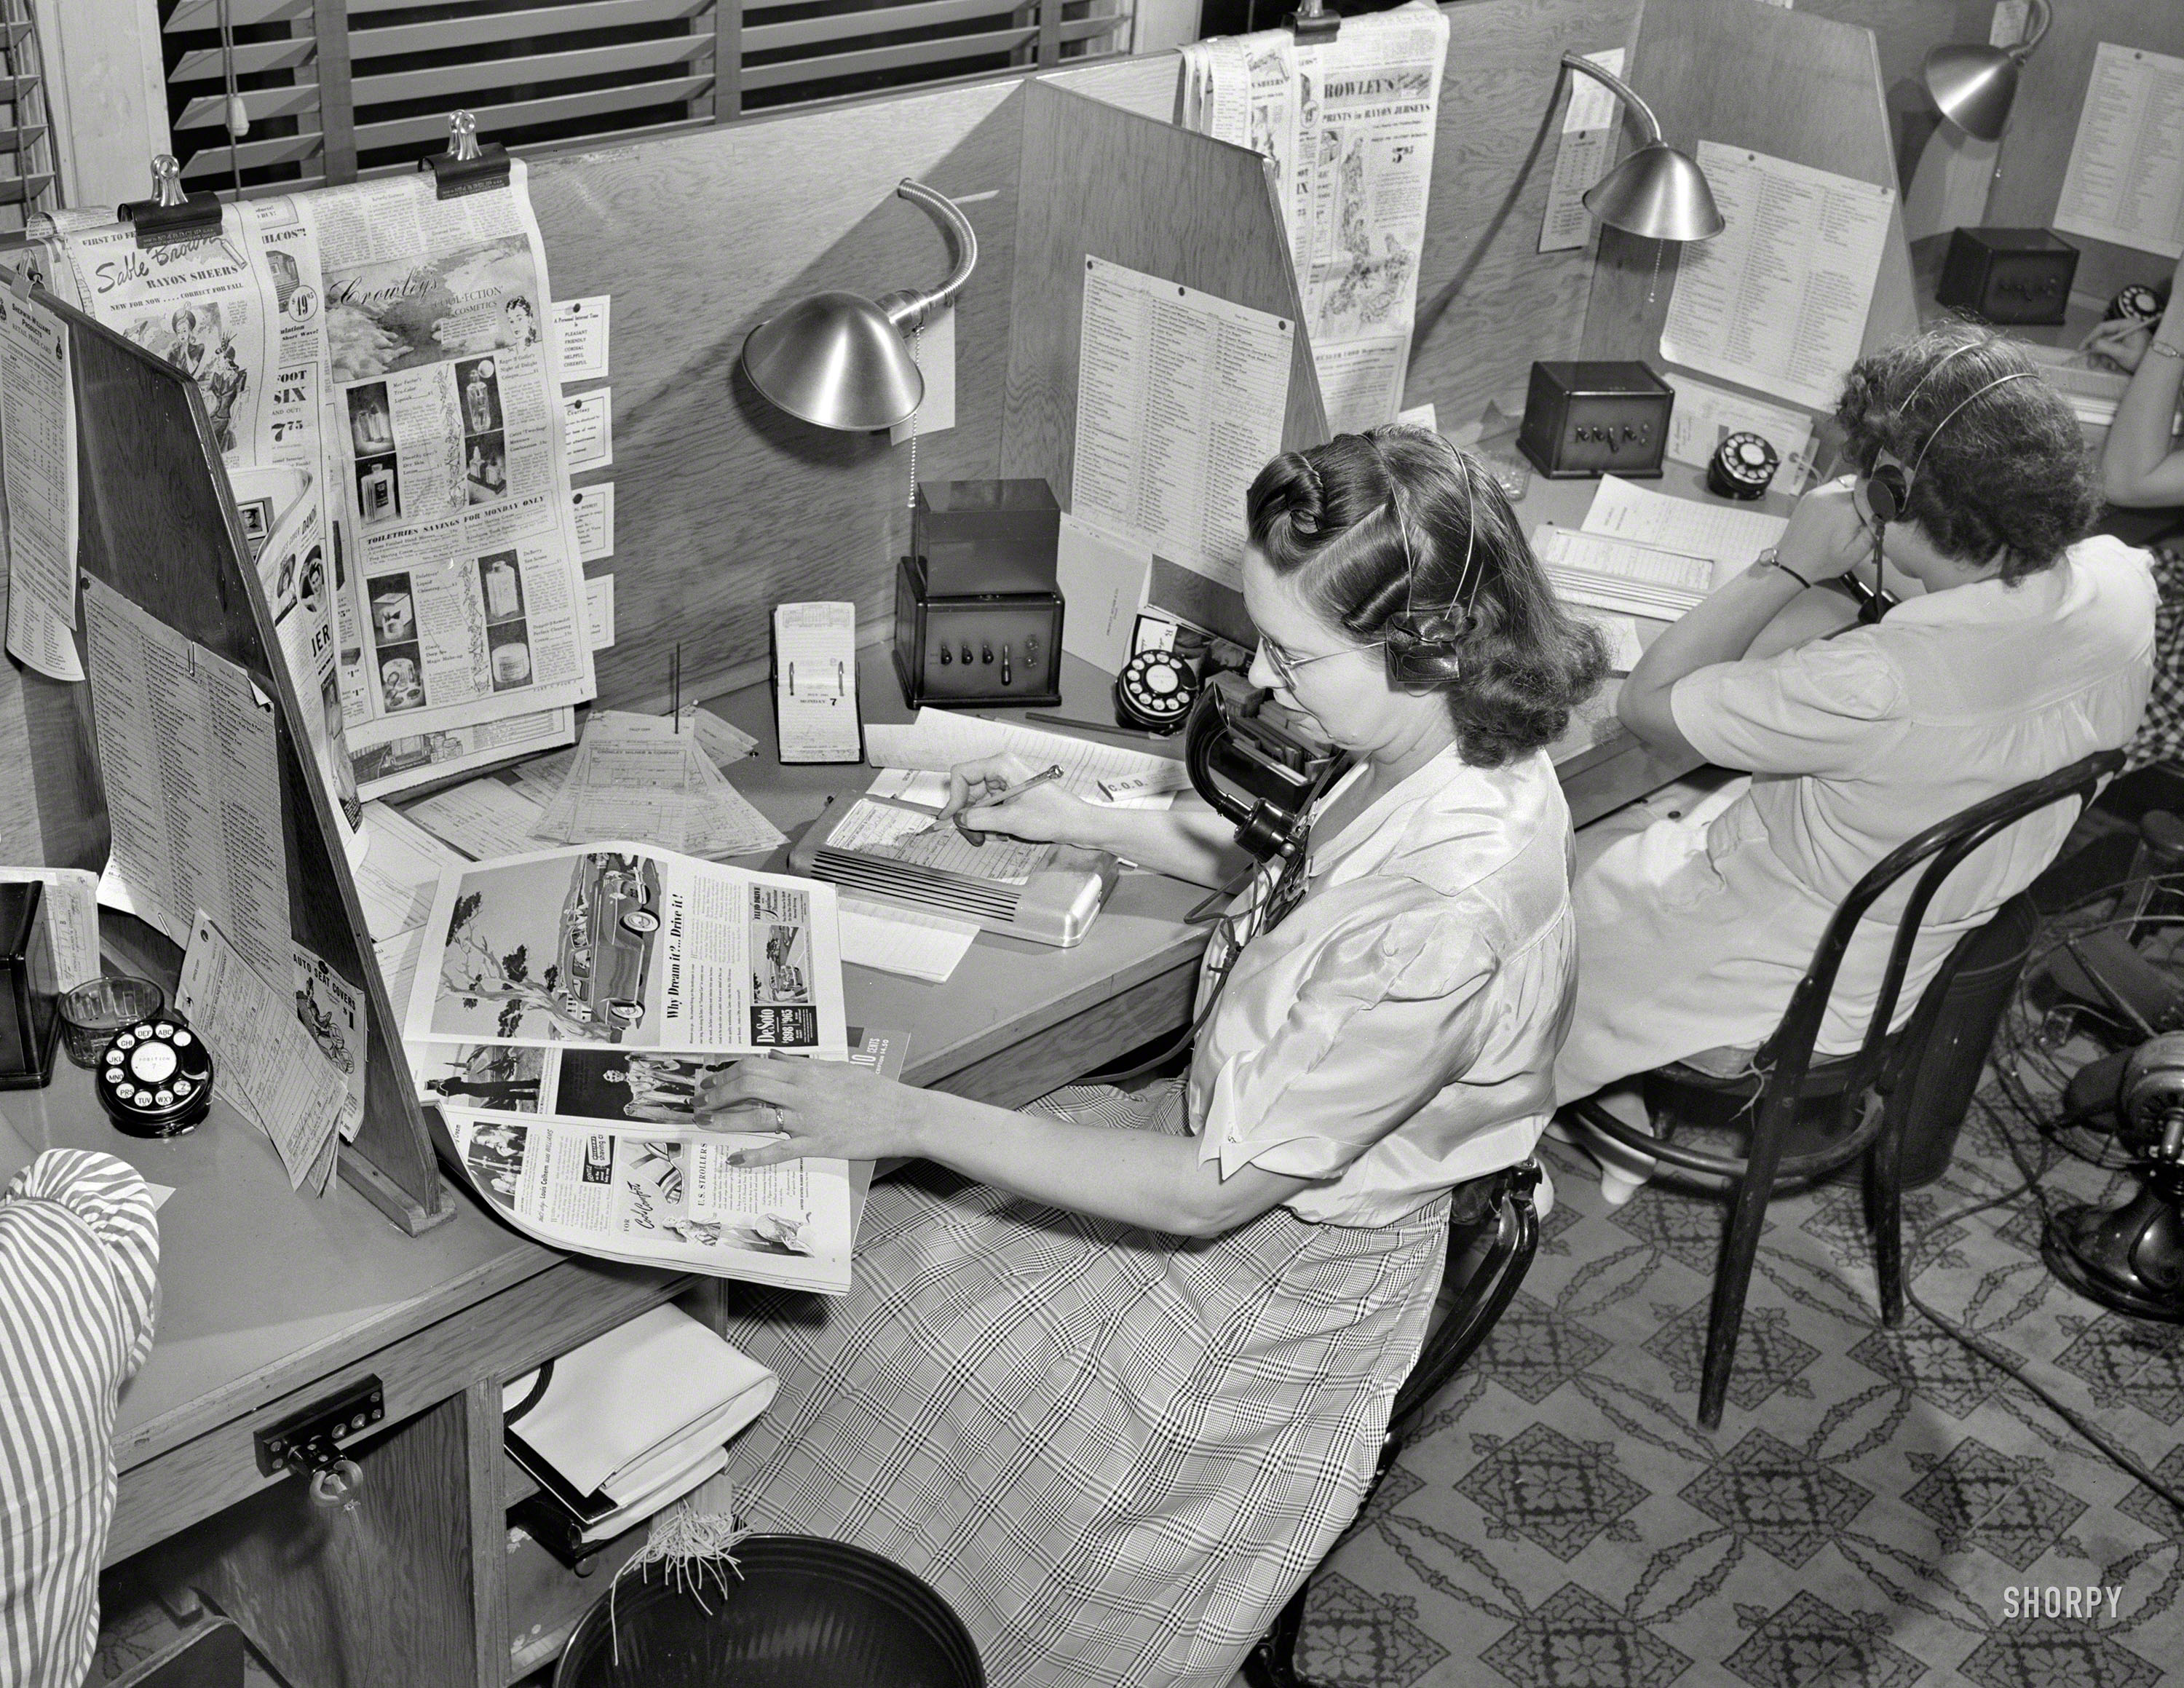 July 1941. "Operator taking telephone orders at the Crowley-Milner department store, Detroit." Continuing this series by Arthur Siegel. View full size.